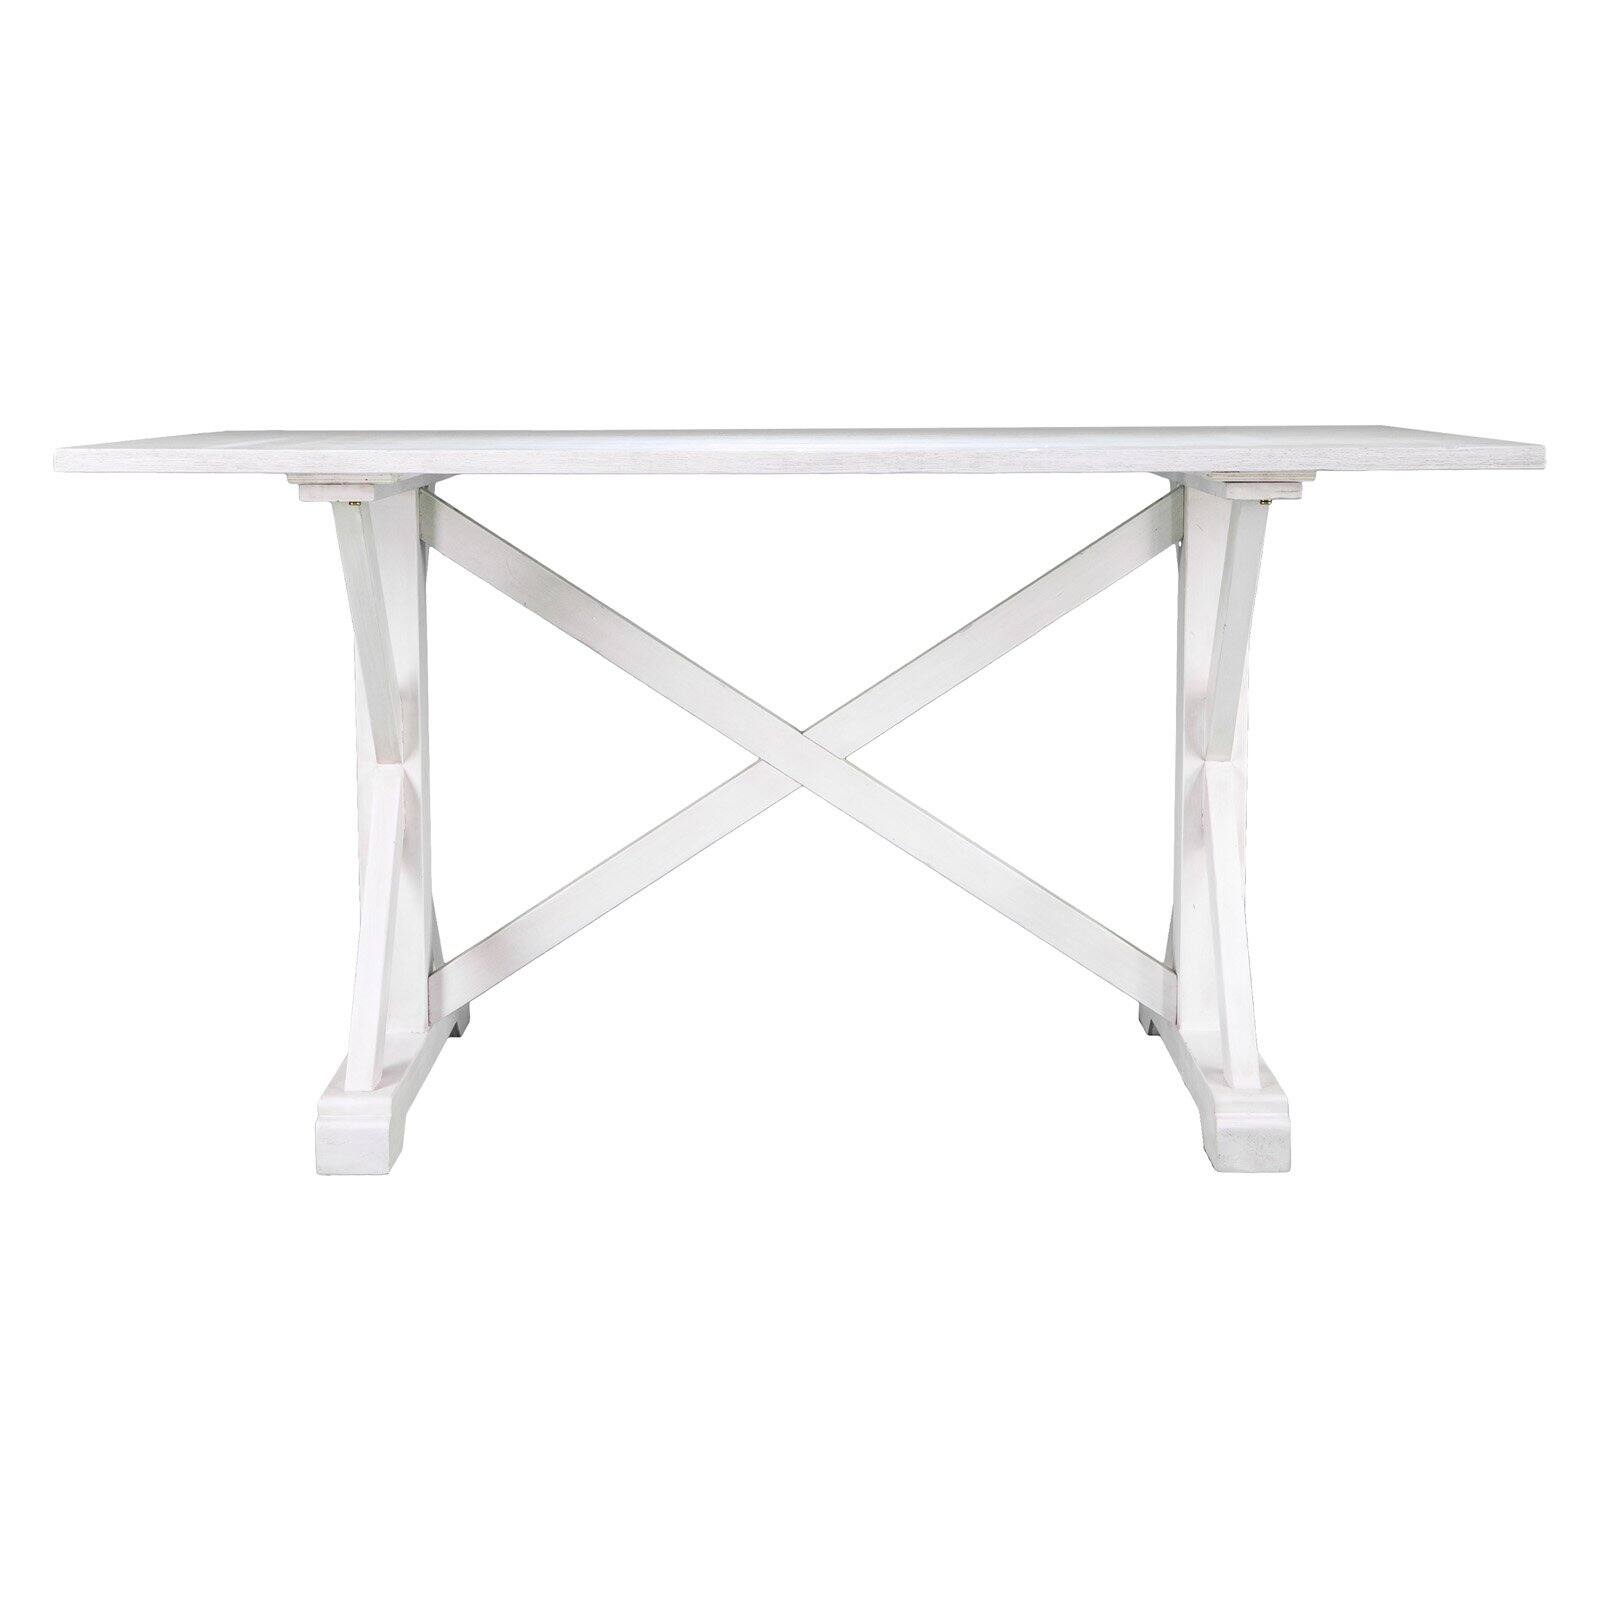 SEI Furniture Cardwell Farmhouse Dining Table in White - image 2 of 8